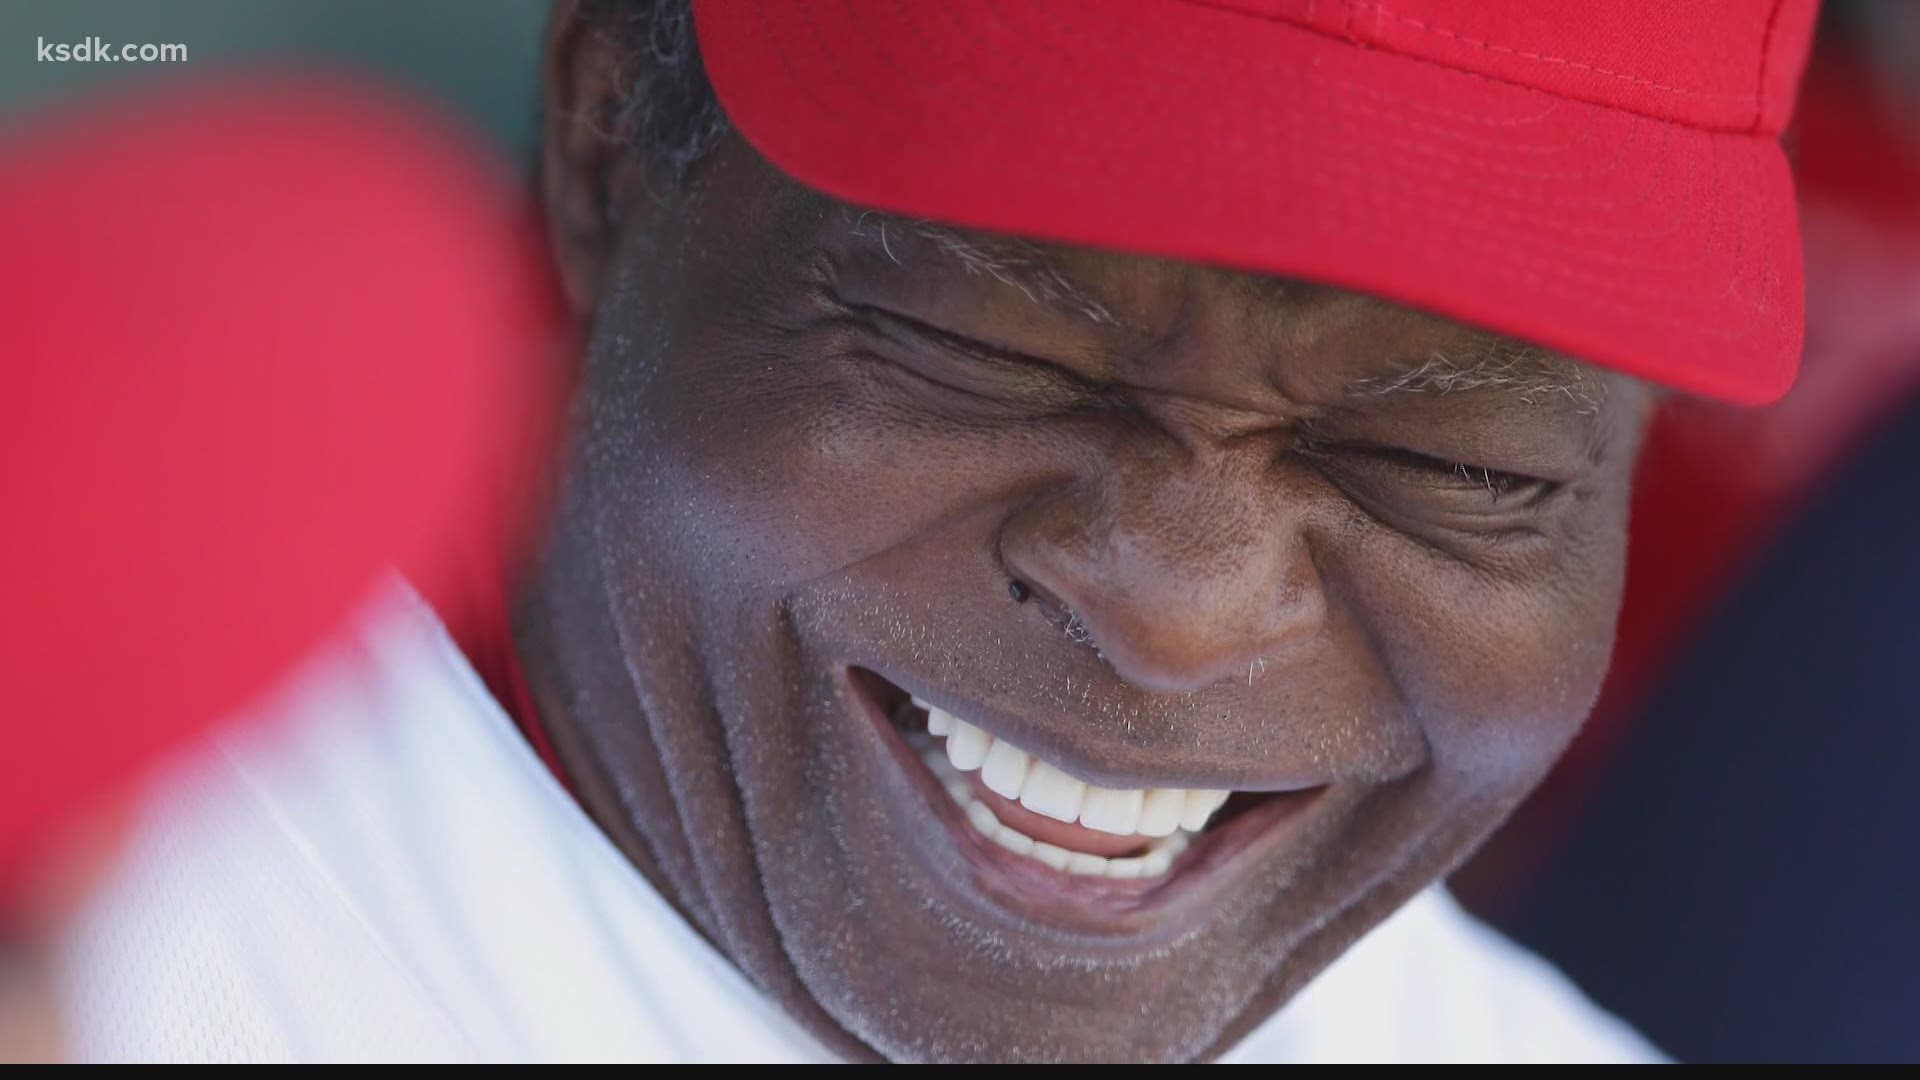 Lou Brock Jr. releases statement on father's death